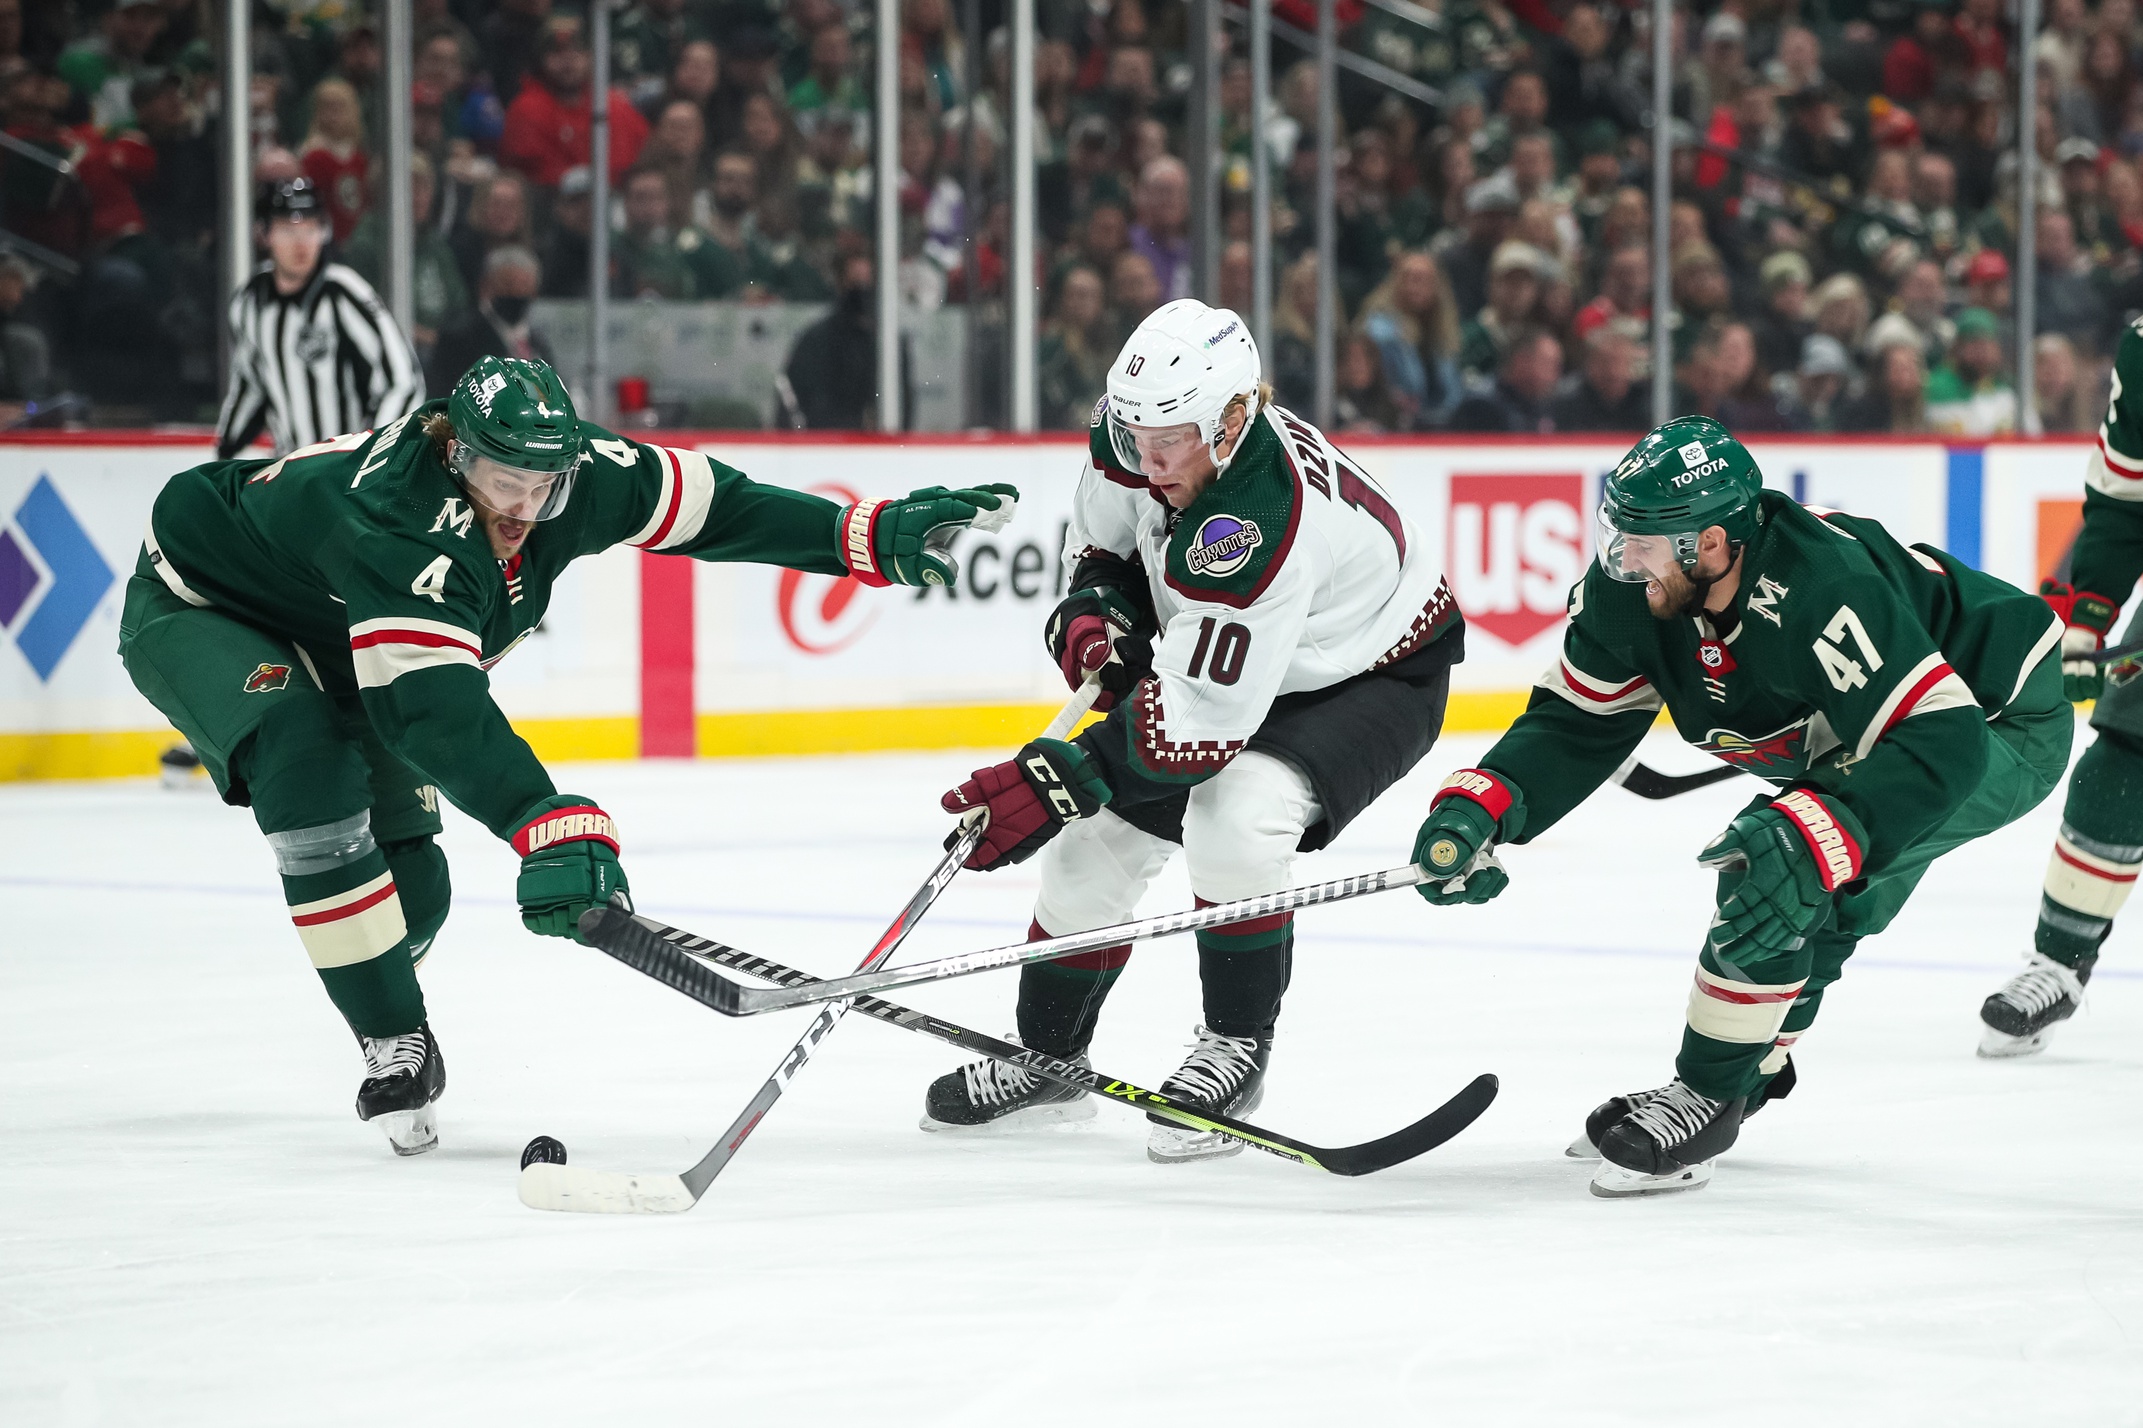 Minnesota Wild Launches Little Wild Learn to Play!